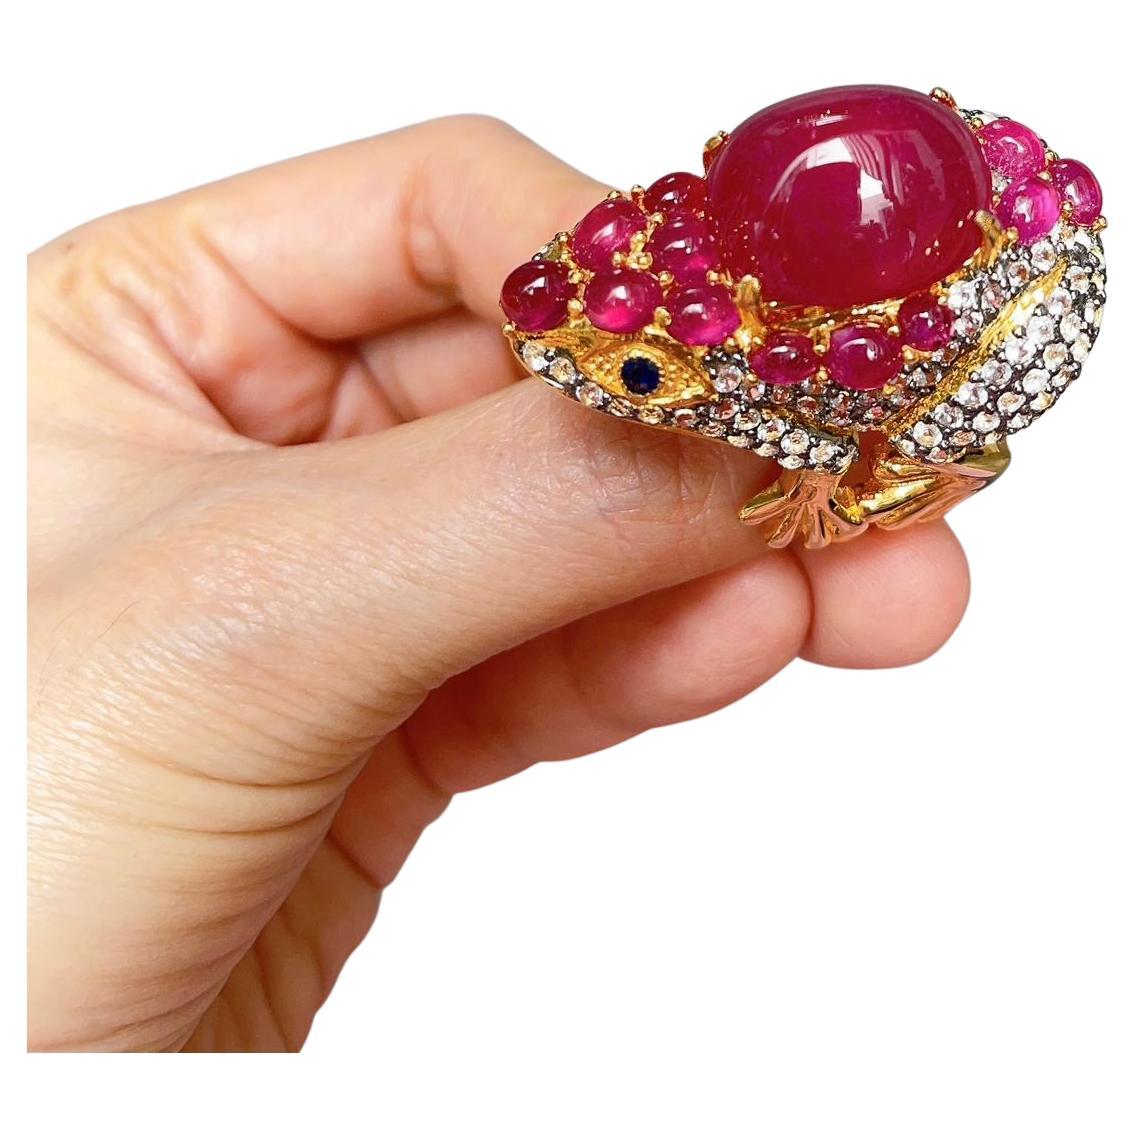 Bochic “Orient” Red Ruby & White Topaz Cocktail Ring Set In 22K Gold & Silver 
Multi natural gem Ring 
One of a kind 
Beautiful Natural Red center Cabochon  - 19 carats
Surrounded by beautiful Red Ruby Natural bubble shape Rubies - 5 carats 
Natural